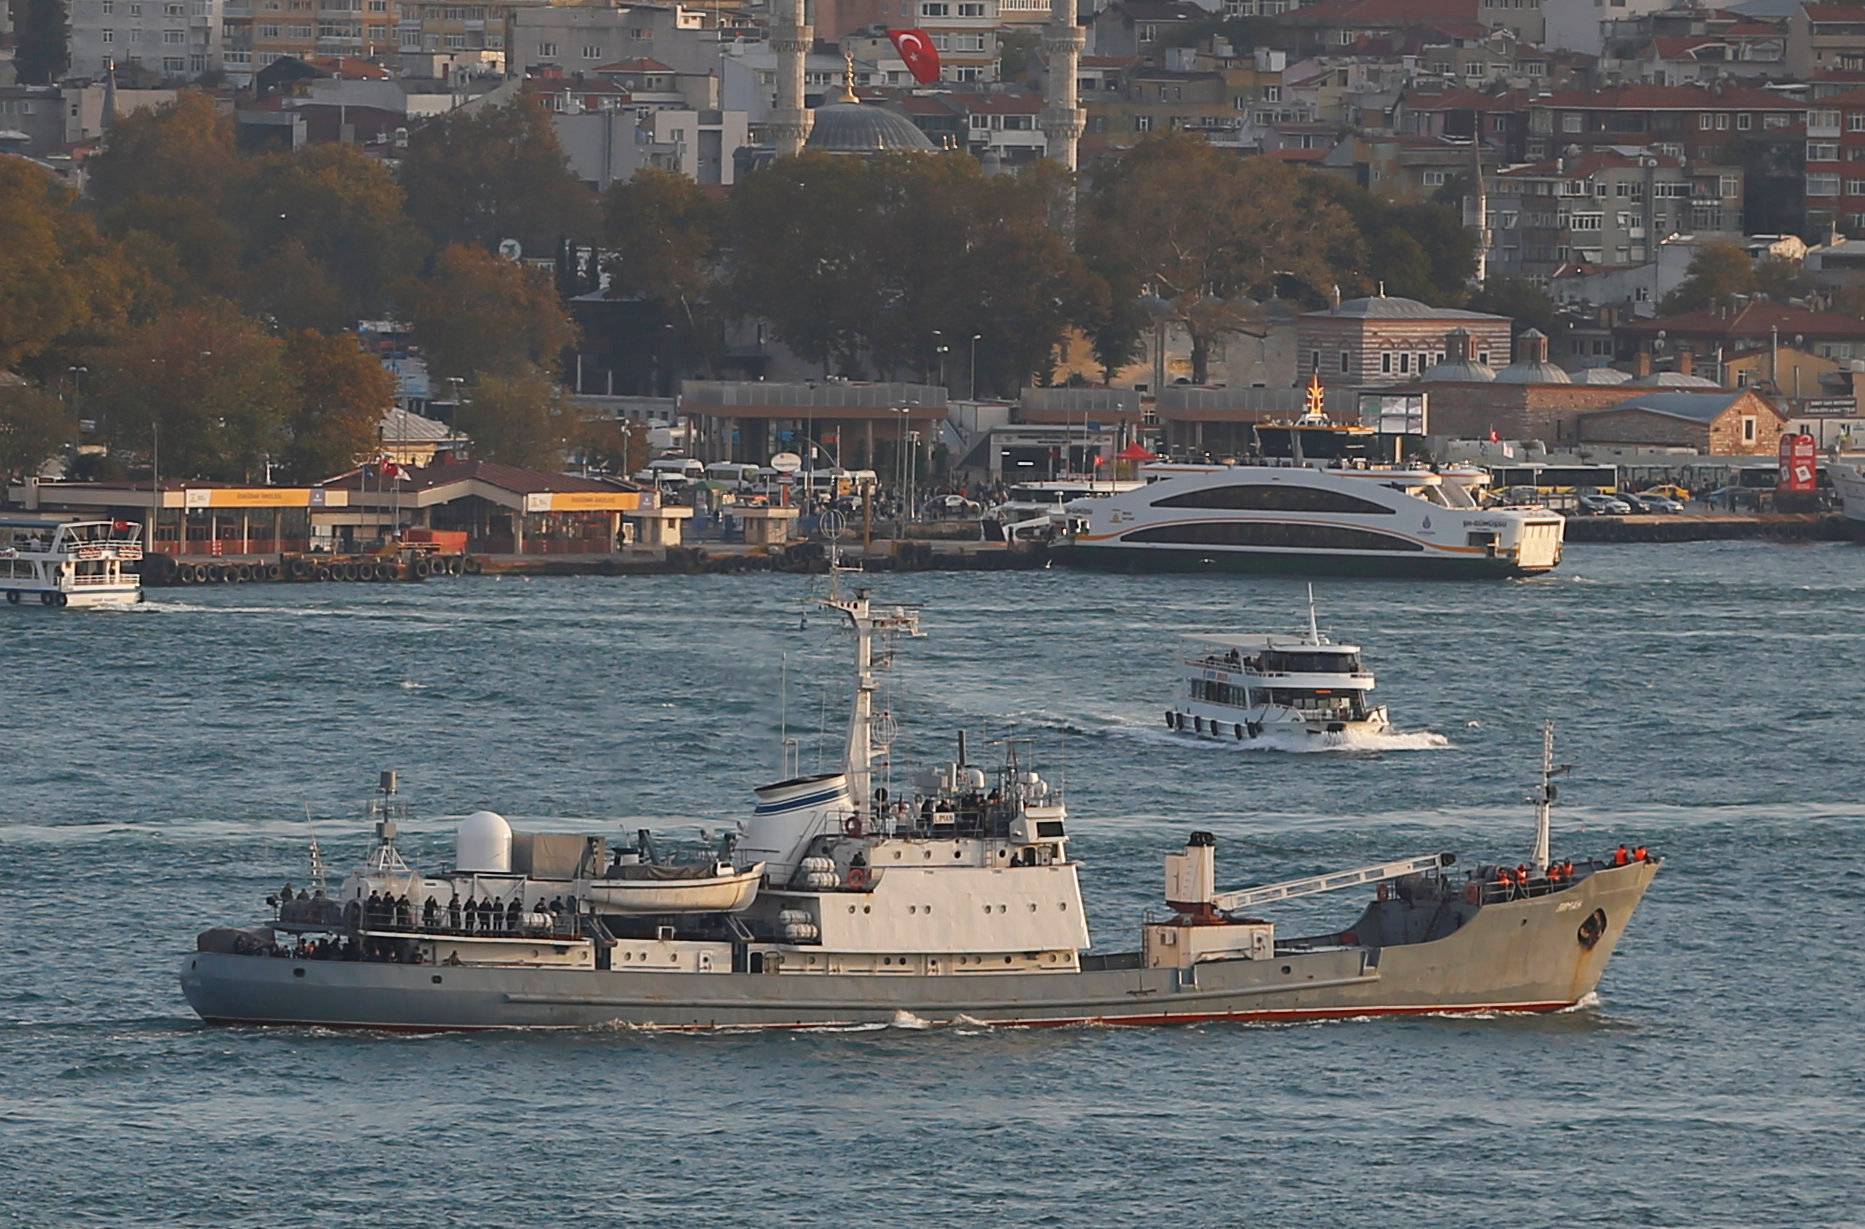 Russian Navy's reconnaissance ship Liman of the Black Sea fleet sails in the Bosphorus, on its way to the Mediterranean Sea, in Istanbul